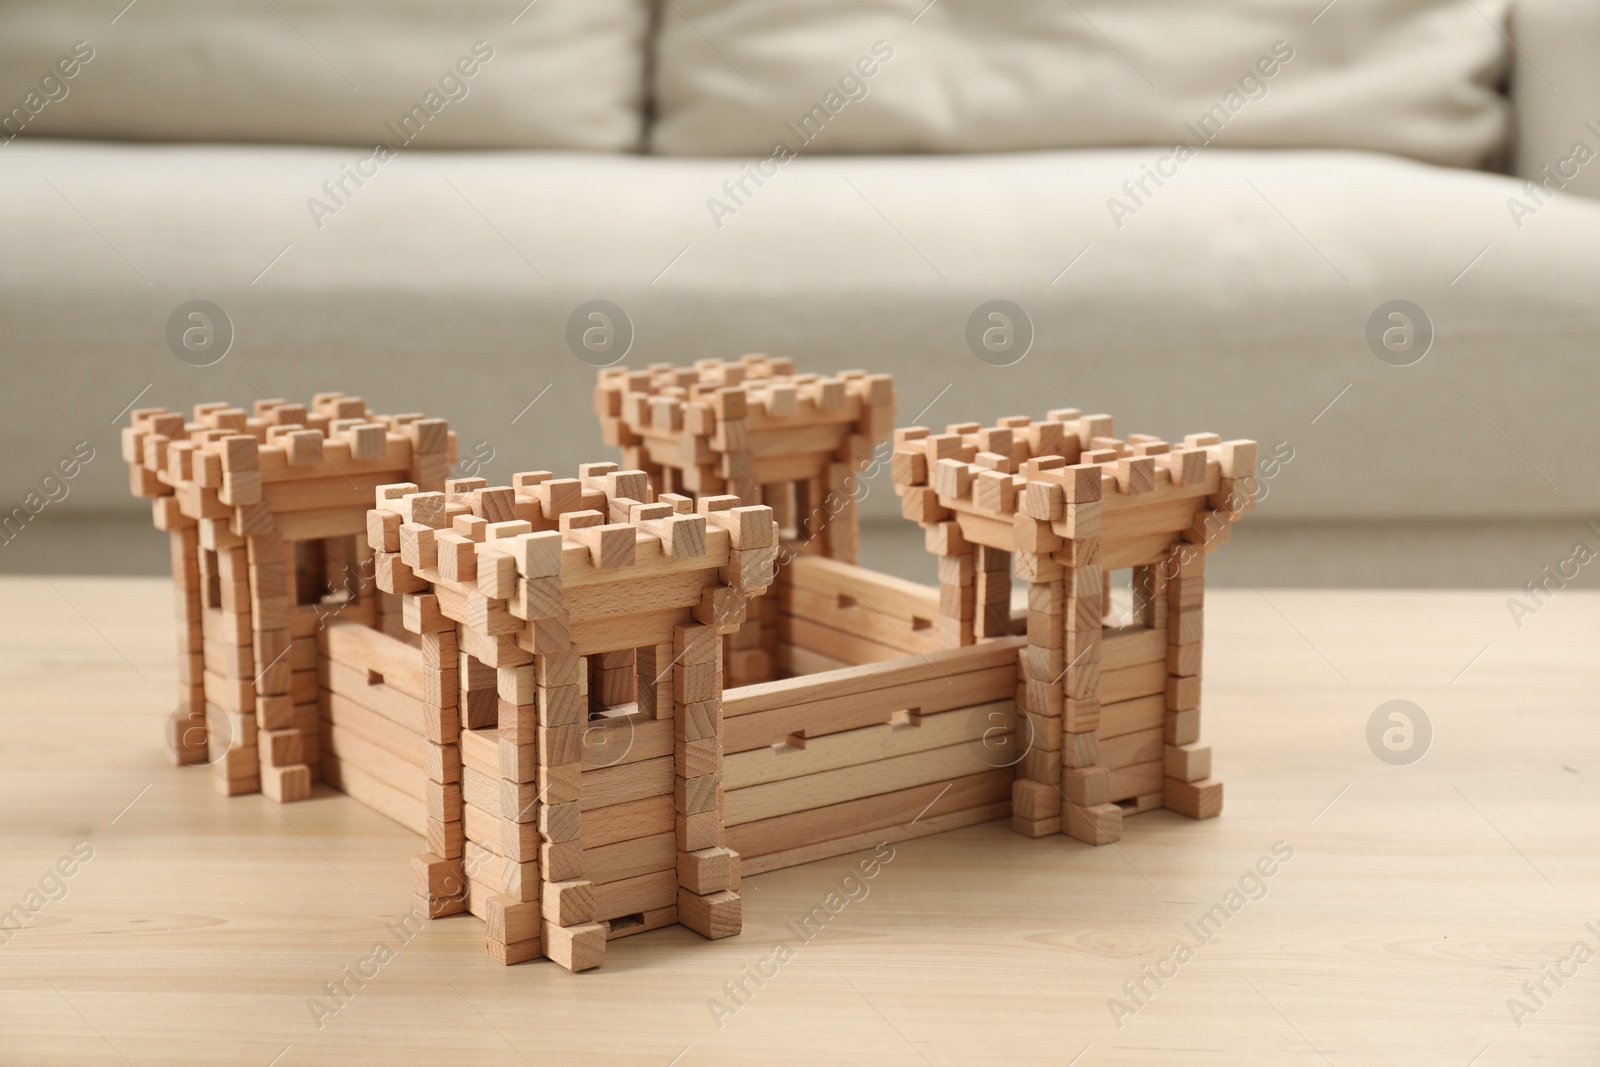 Photo of Wooden fortress on table indoors. Children's toy